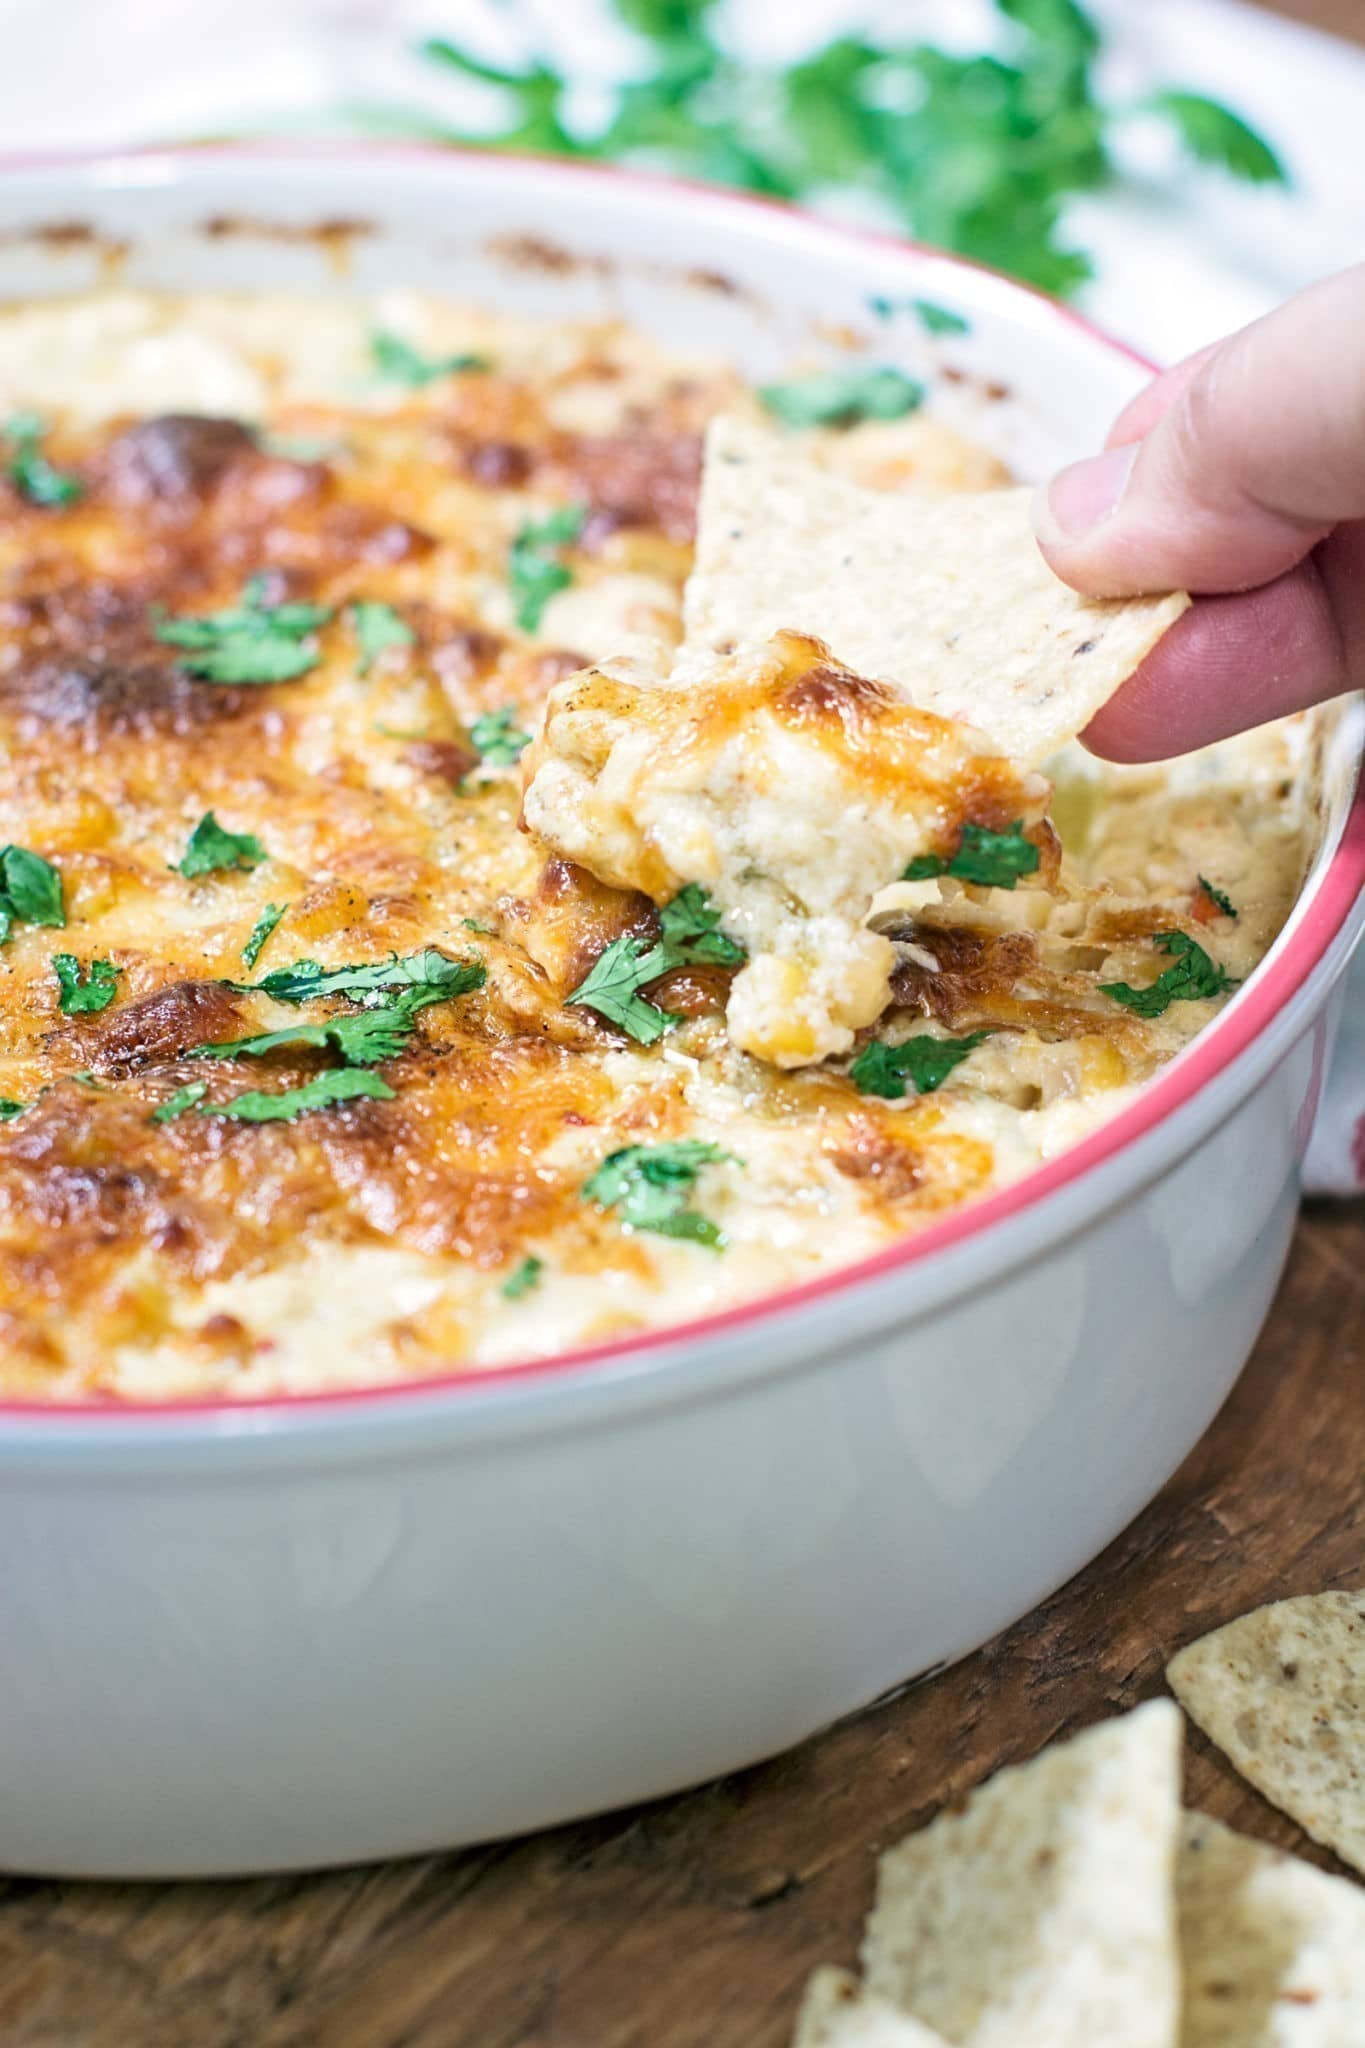 Completely tasty smokin' Hot Corn Dip recipe served up with your favorite tortilla chips.